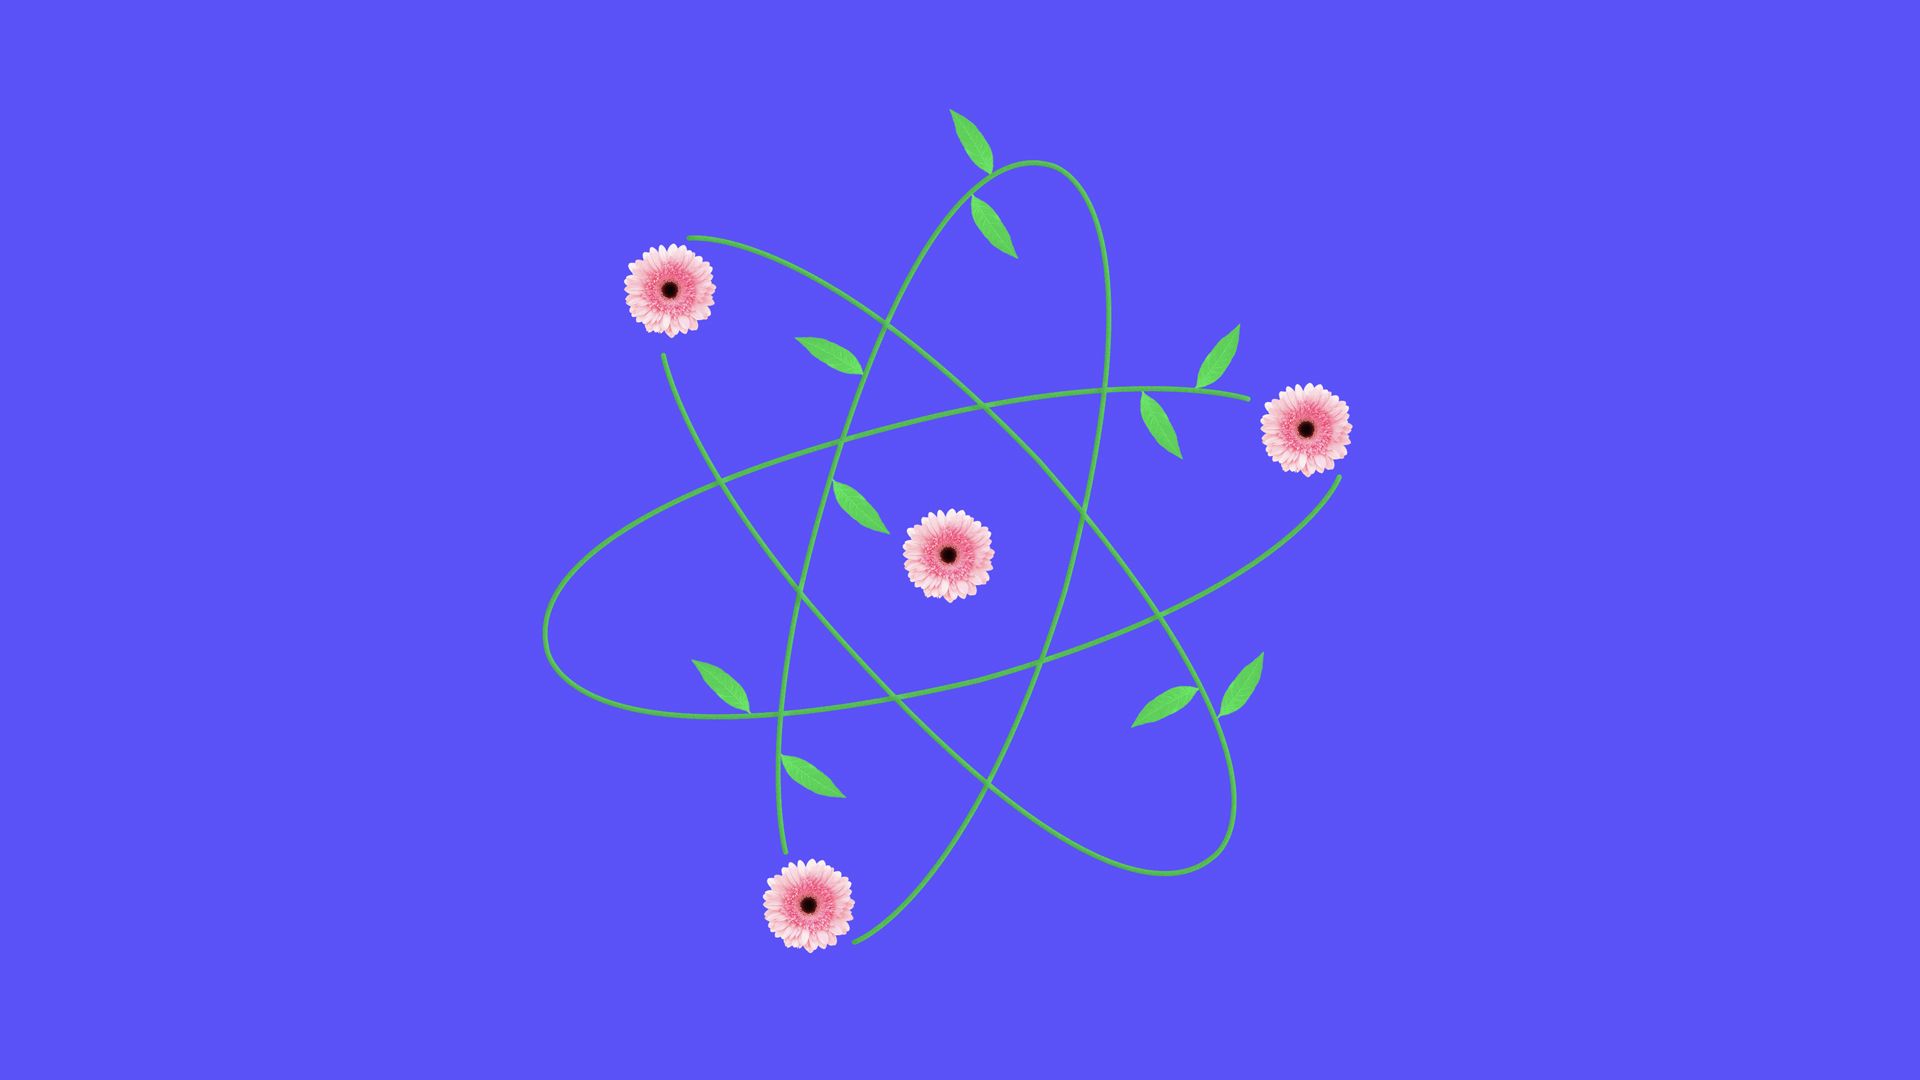 Illustration of nuclear symbol made out of plants 